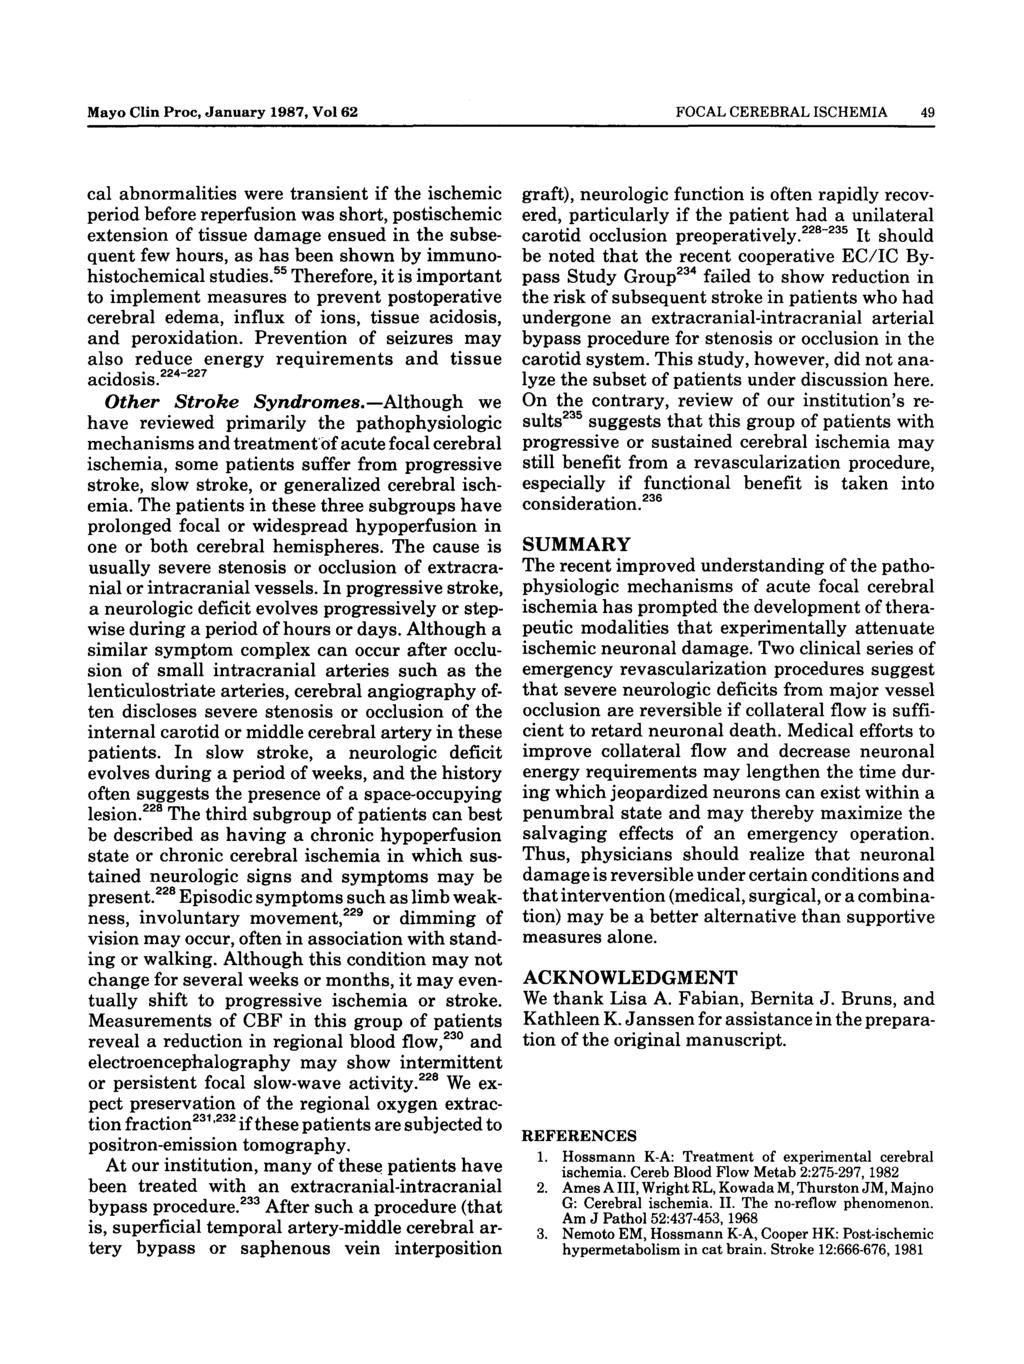 Mayo Clin Proc, January 1987, Vol 62 FOCAL CEREBRAL ISCHEMIA 49 cal abnormalities were transient if the ischemic period before reperfusion was short, postischemic extension of tissue damage ensued in